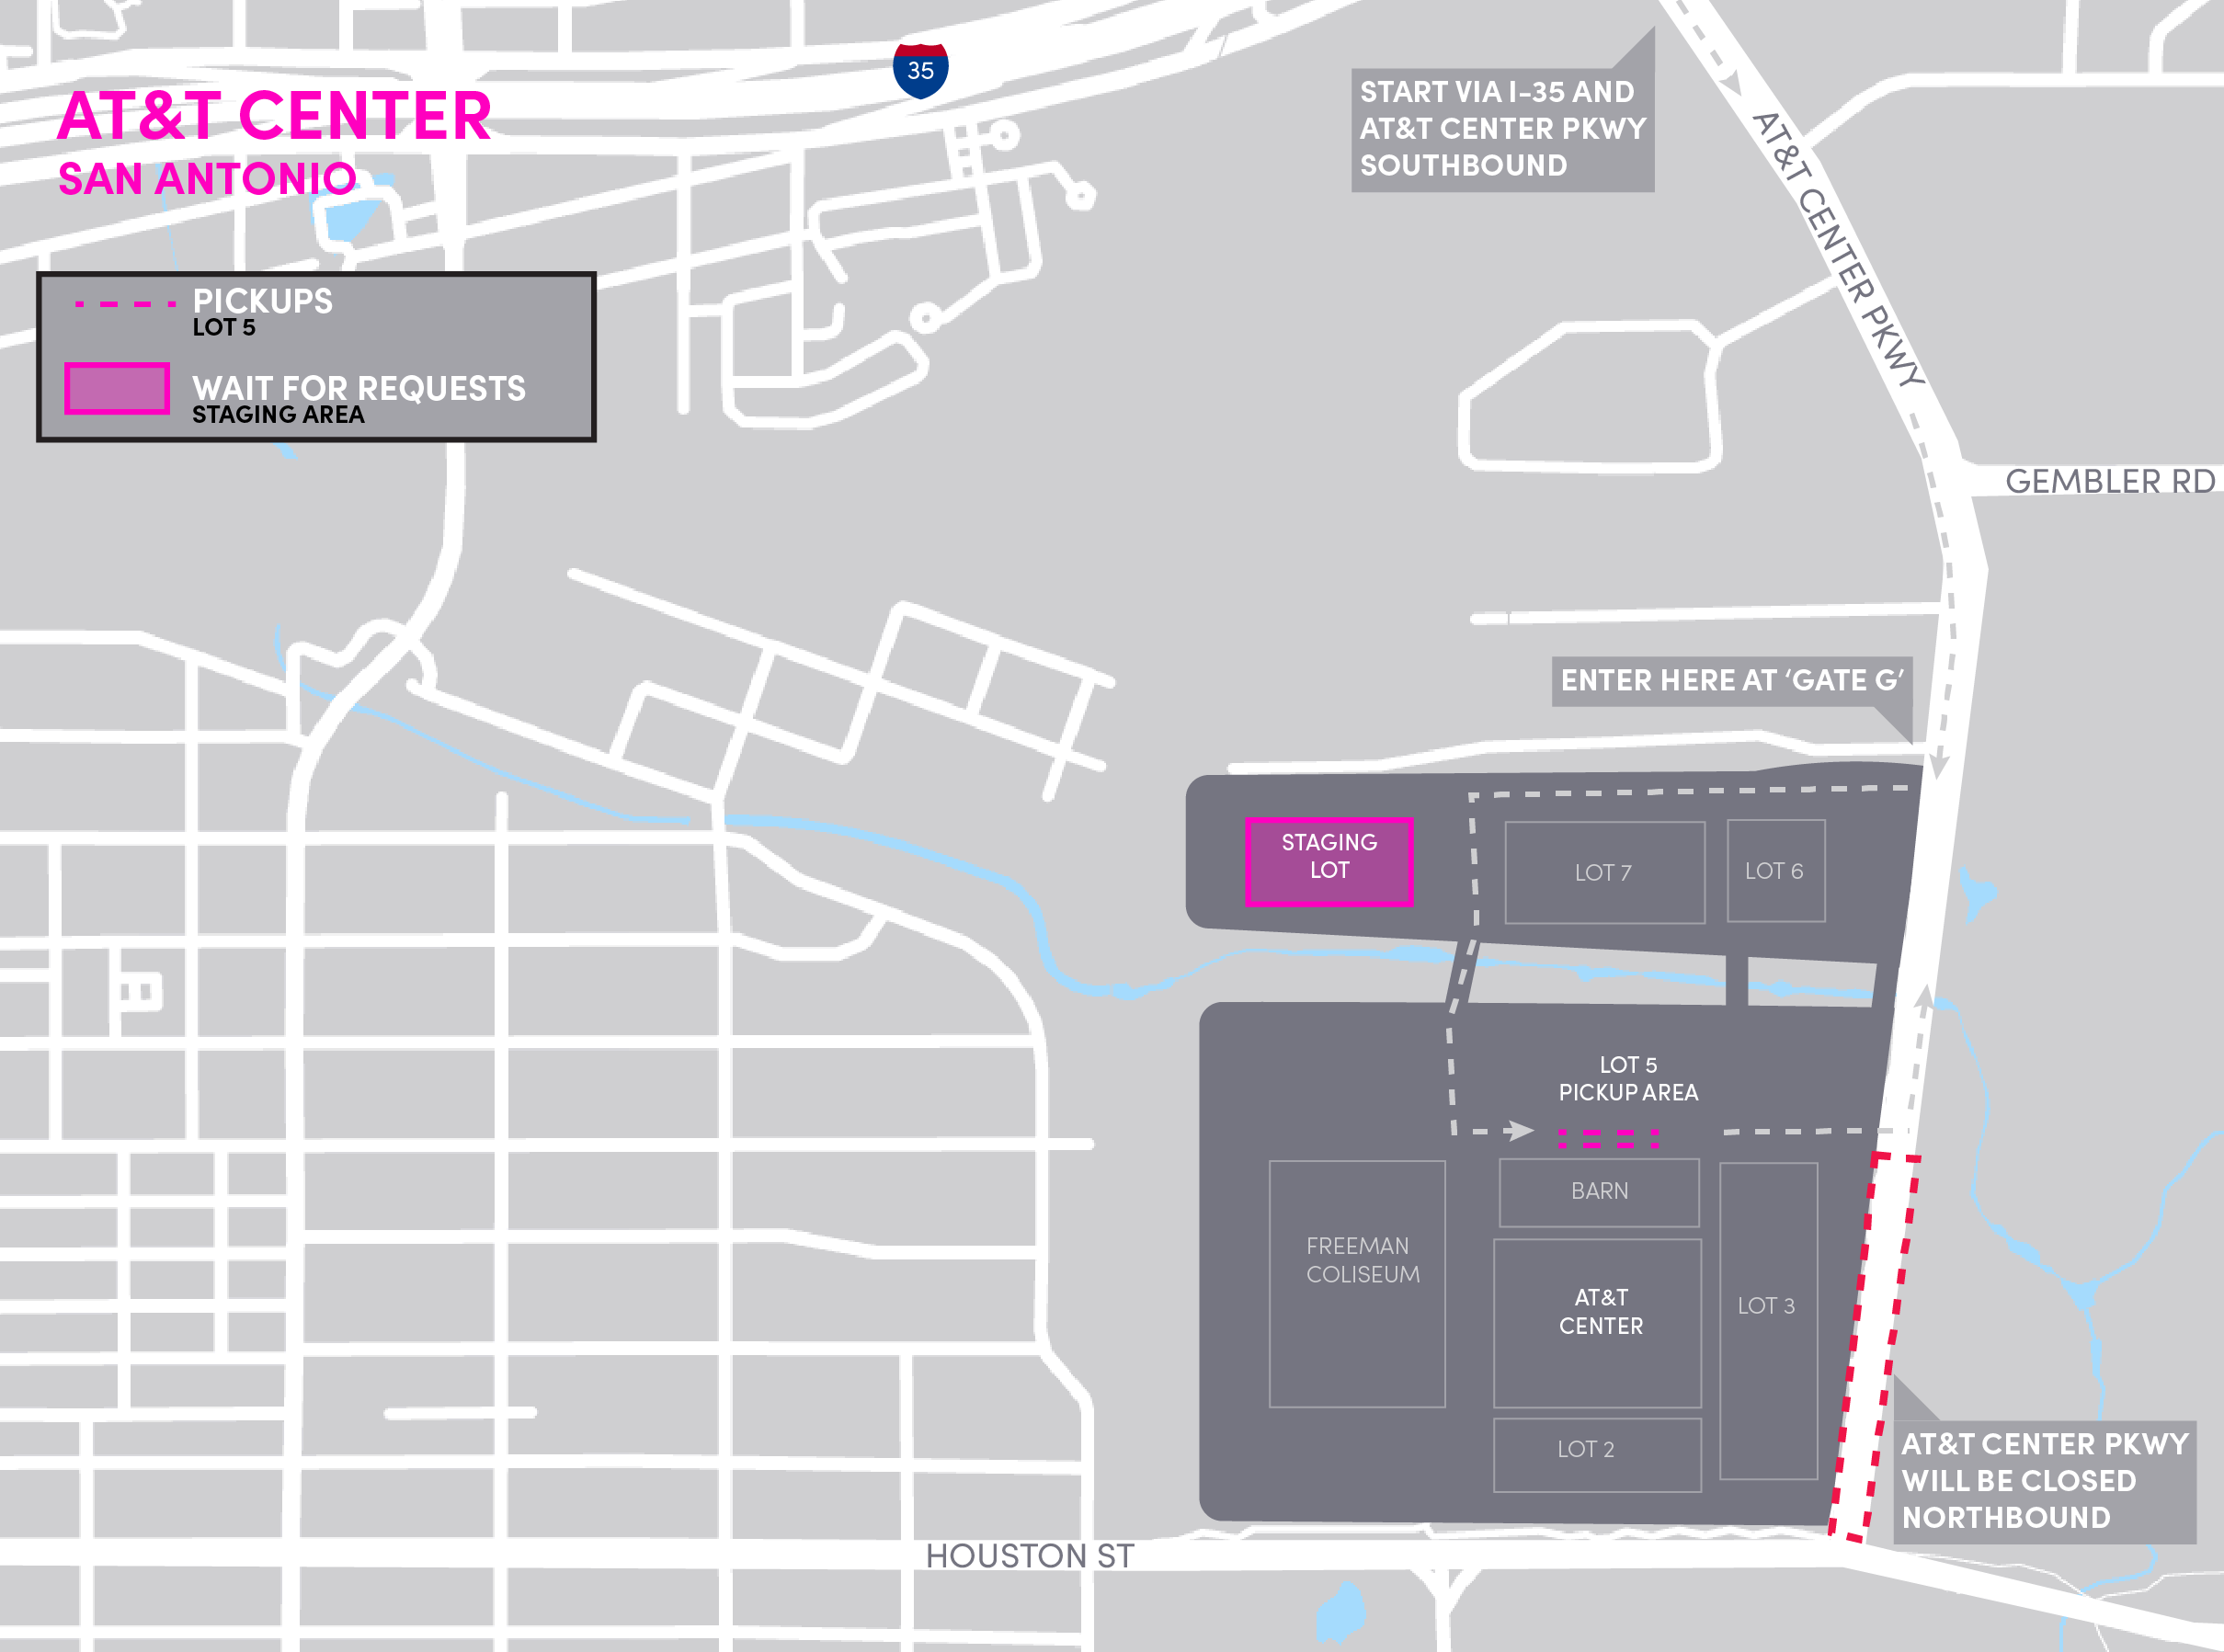 Map of the AT&T Center in San Antonio, detailing pickup and waiting area locations.